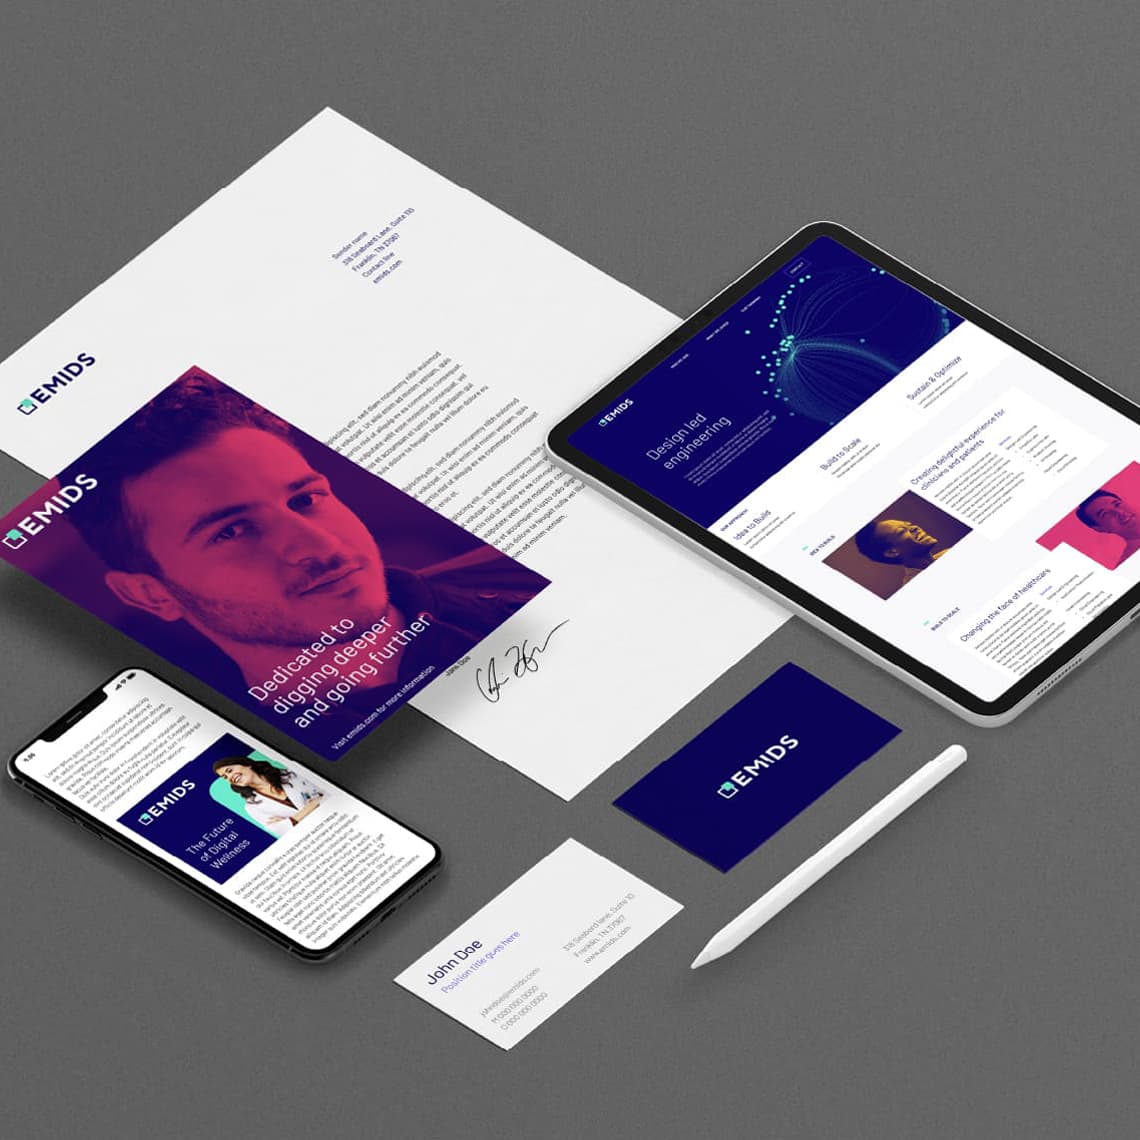 The design system used in a variety of elements: letterhead, Website, mobile application, folder and business cards